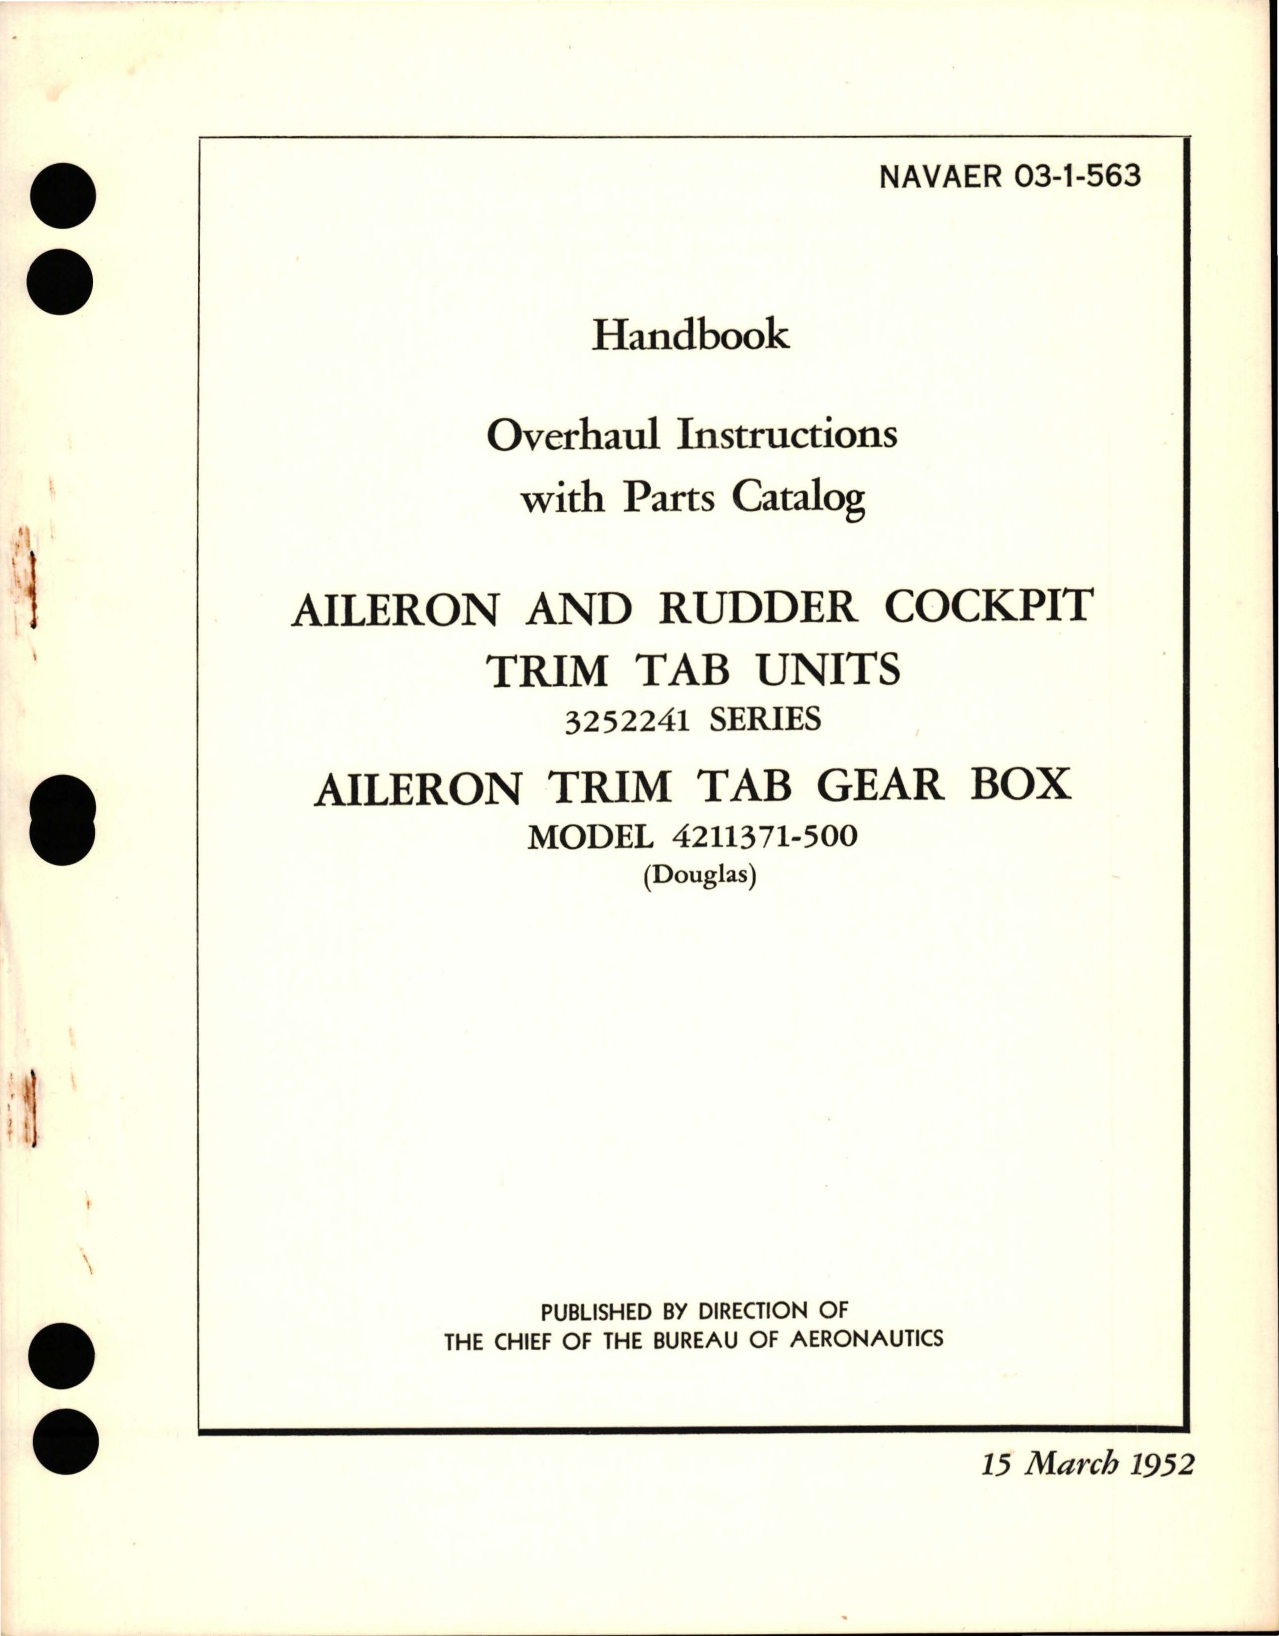 Sample page 1 from AirCorps Library document: Overhaul Instructions with Parts Catalog for Aileron and Rudder Cockpit Trim Tab Units and Aileron Trim Tab Gear Box 